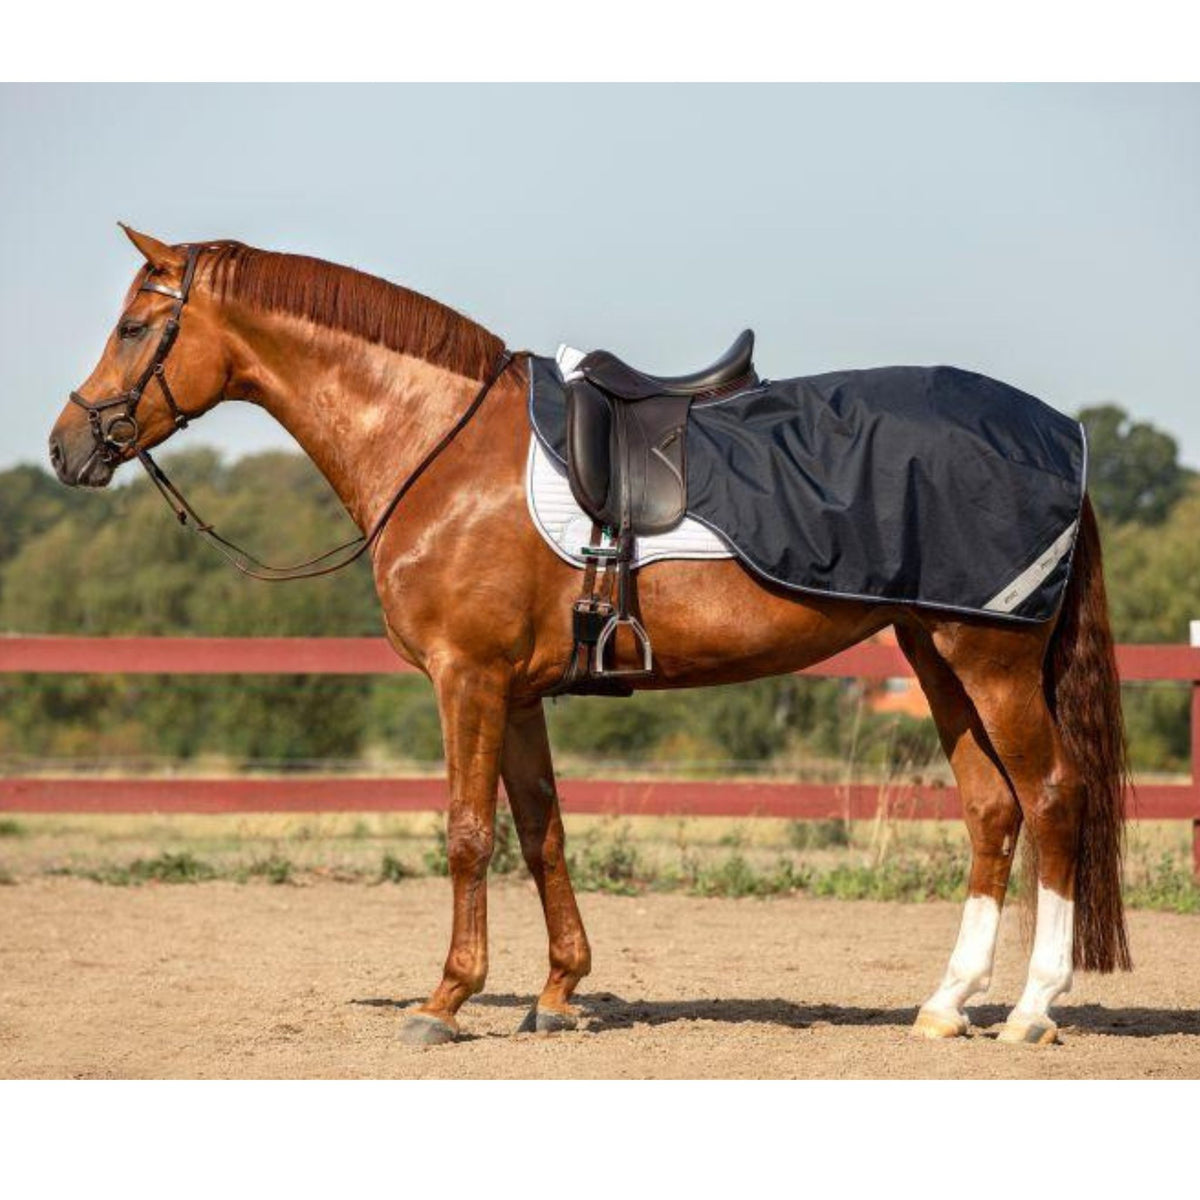 Navy ridding rug with reflective tape on chestnut horse.